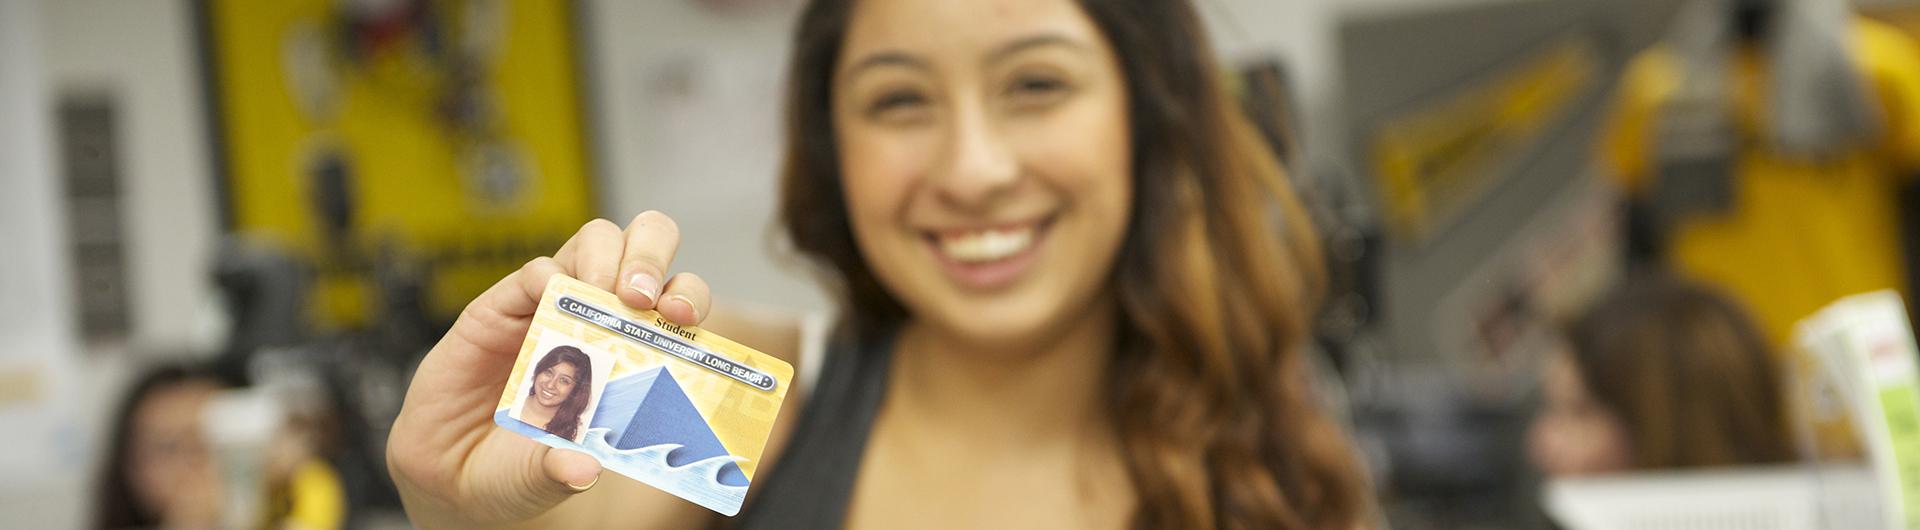 girl smiling with id card